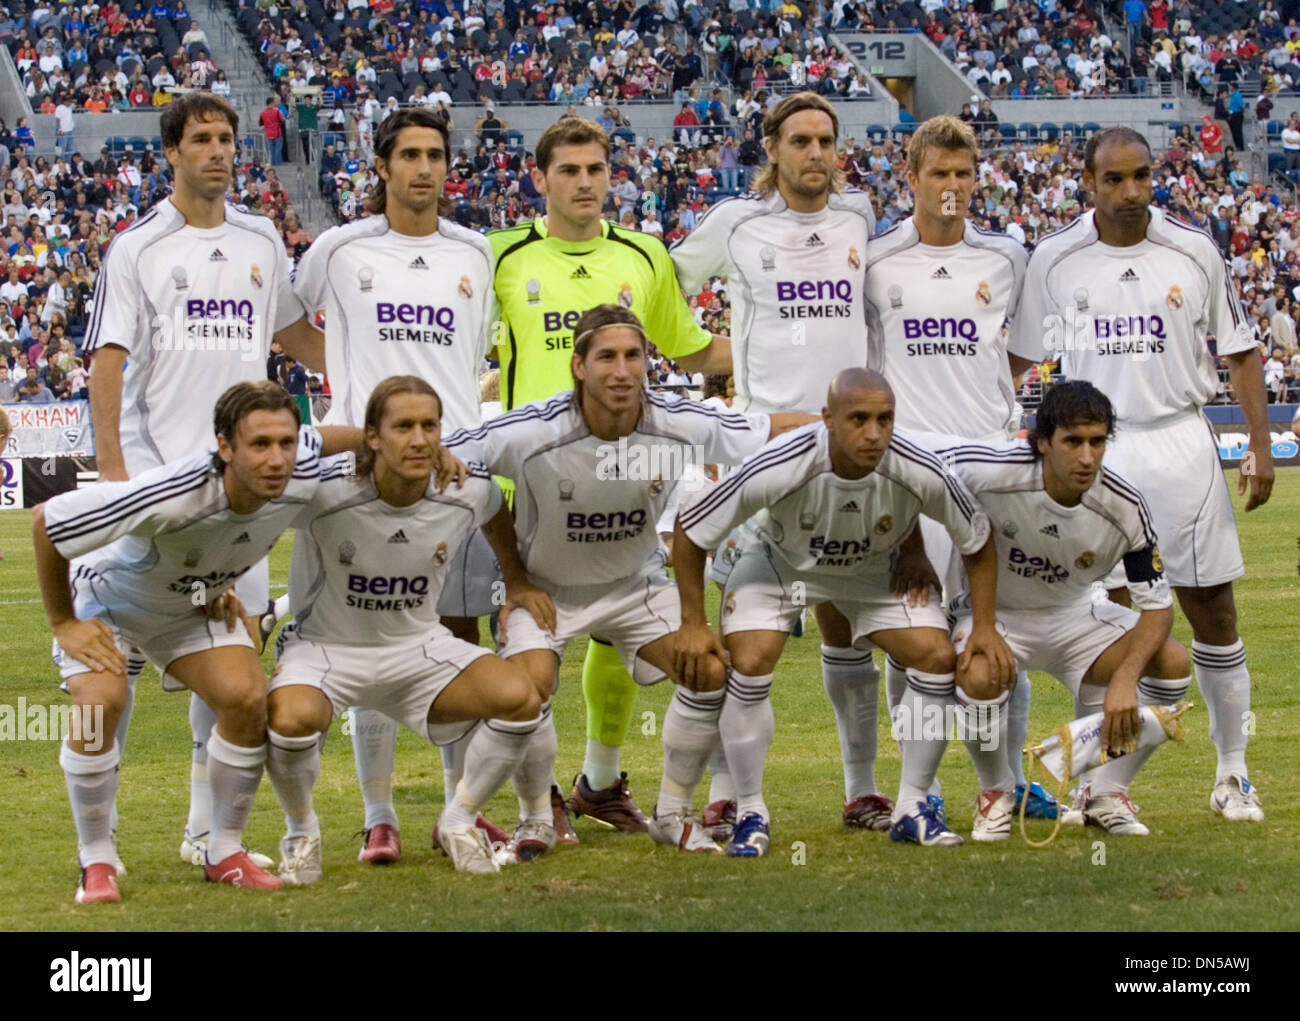 Aug 09, 2006; Seattle, WA, USA; Real Madrid team members pose prior to their exhibition soccer match against D.C. United. Mandatory Credit: Photo by Richard Clement/ZUMA Press. (©) Copyright 2006 by Richard Clement Stock Photo